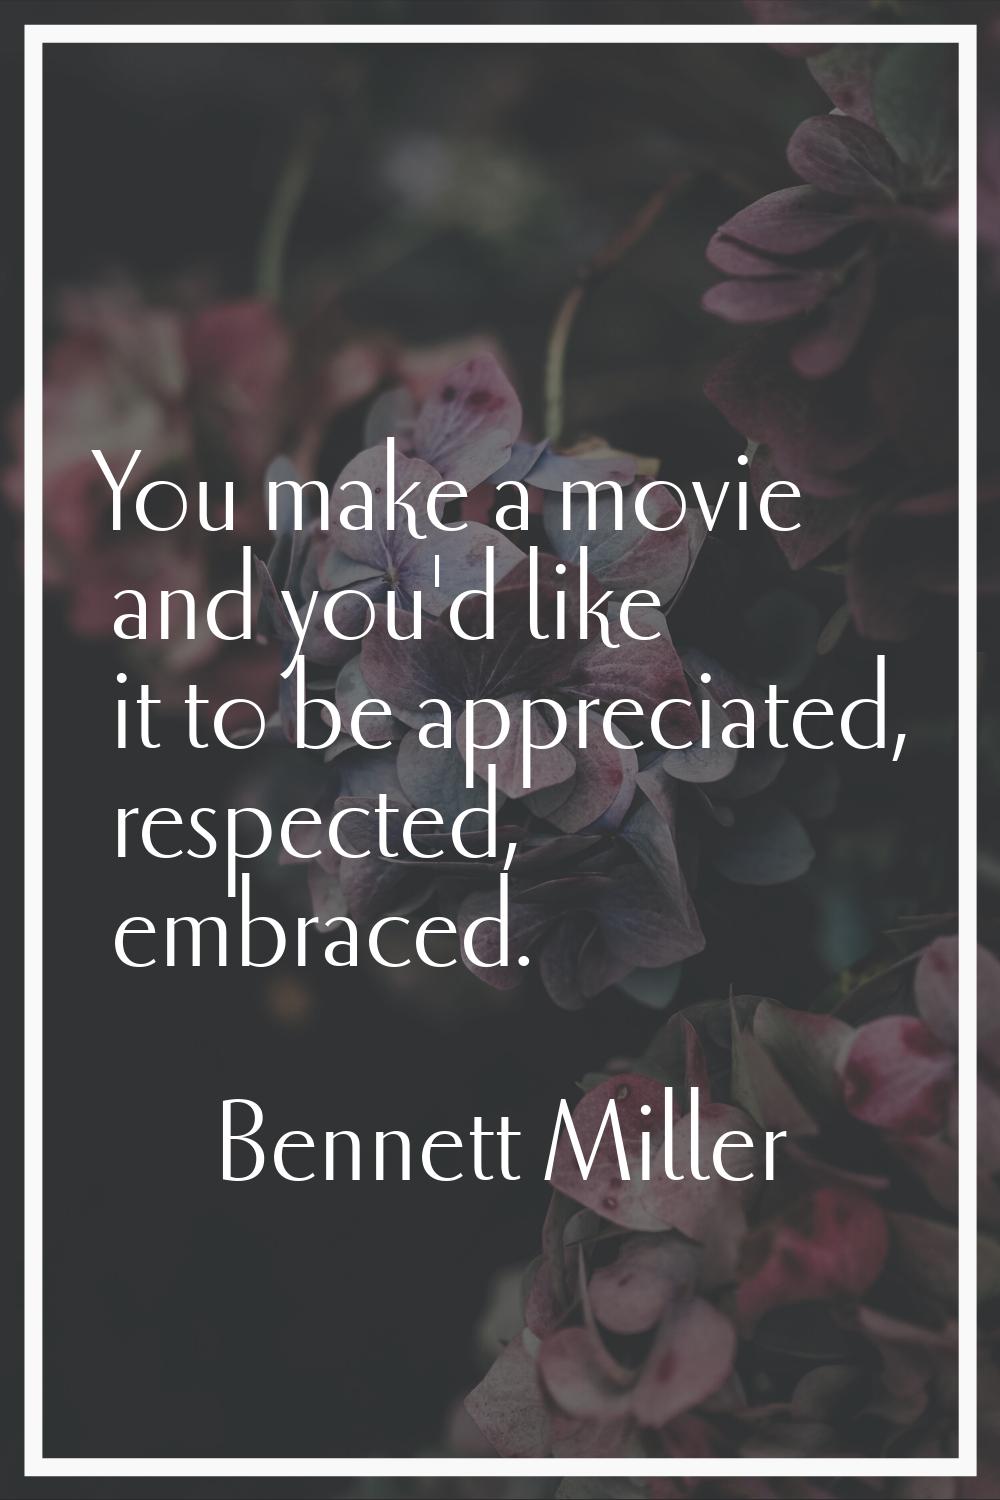 You make a movie and you'd like it to be appreciated, respected, embraced.